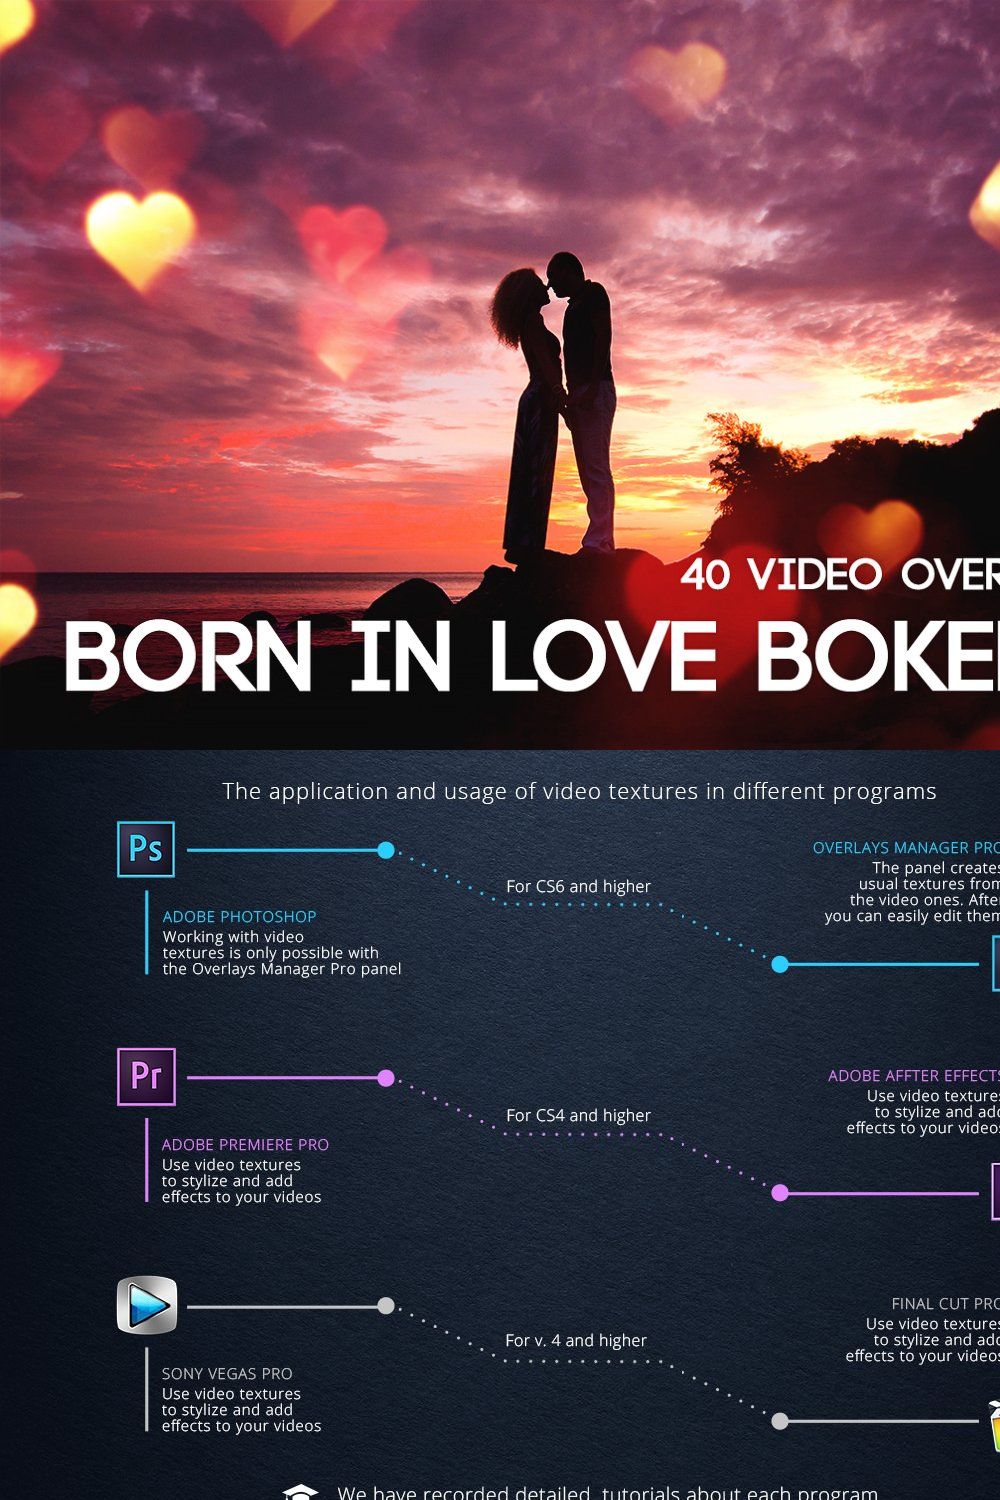 Born in Love Bokehs pinterest preview image.